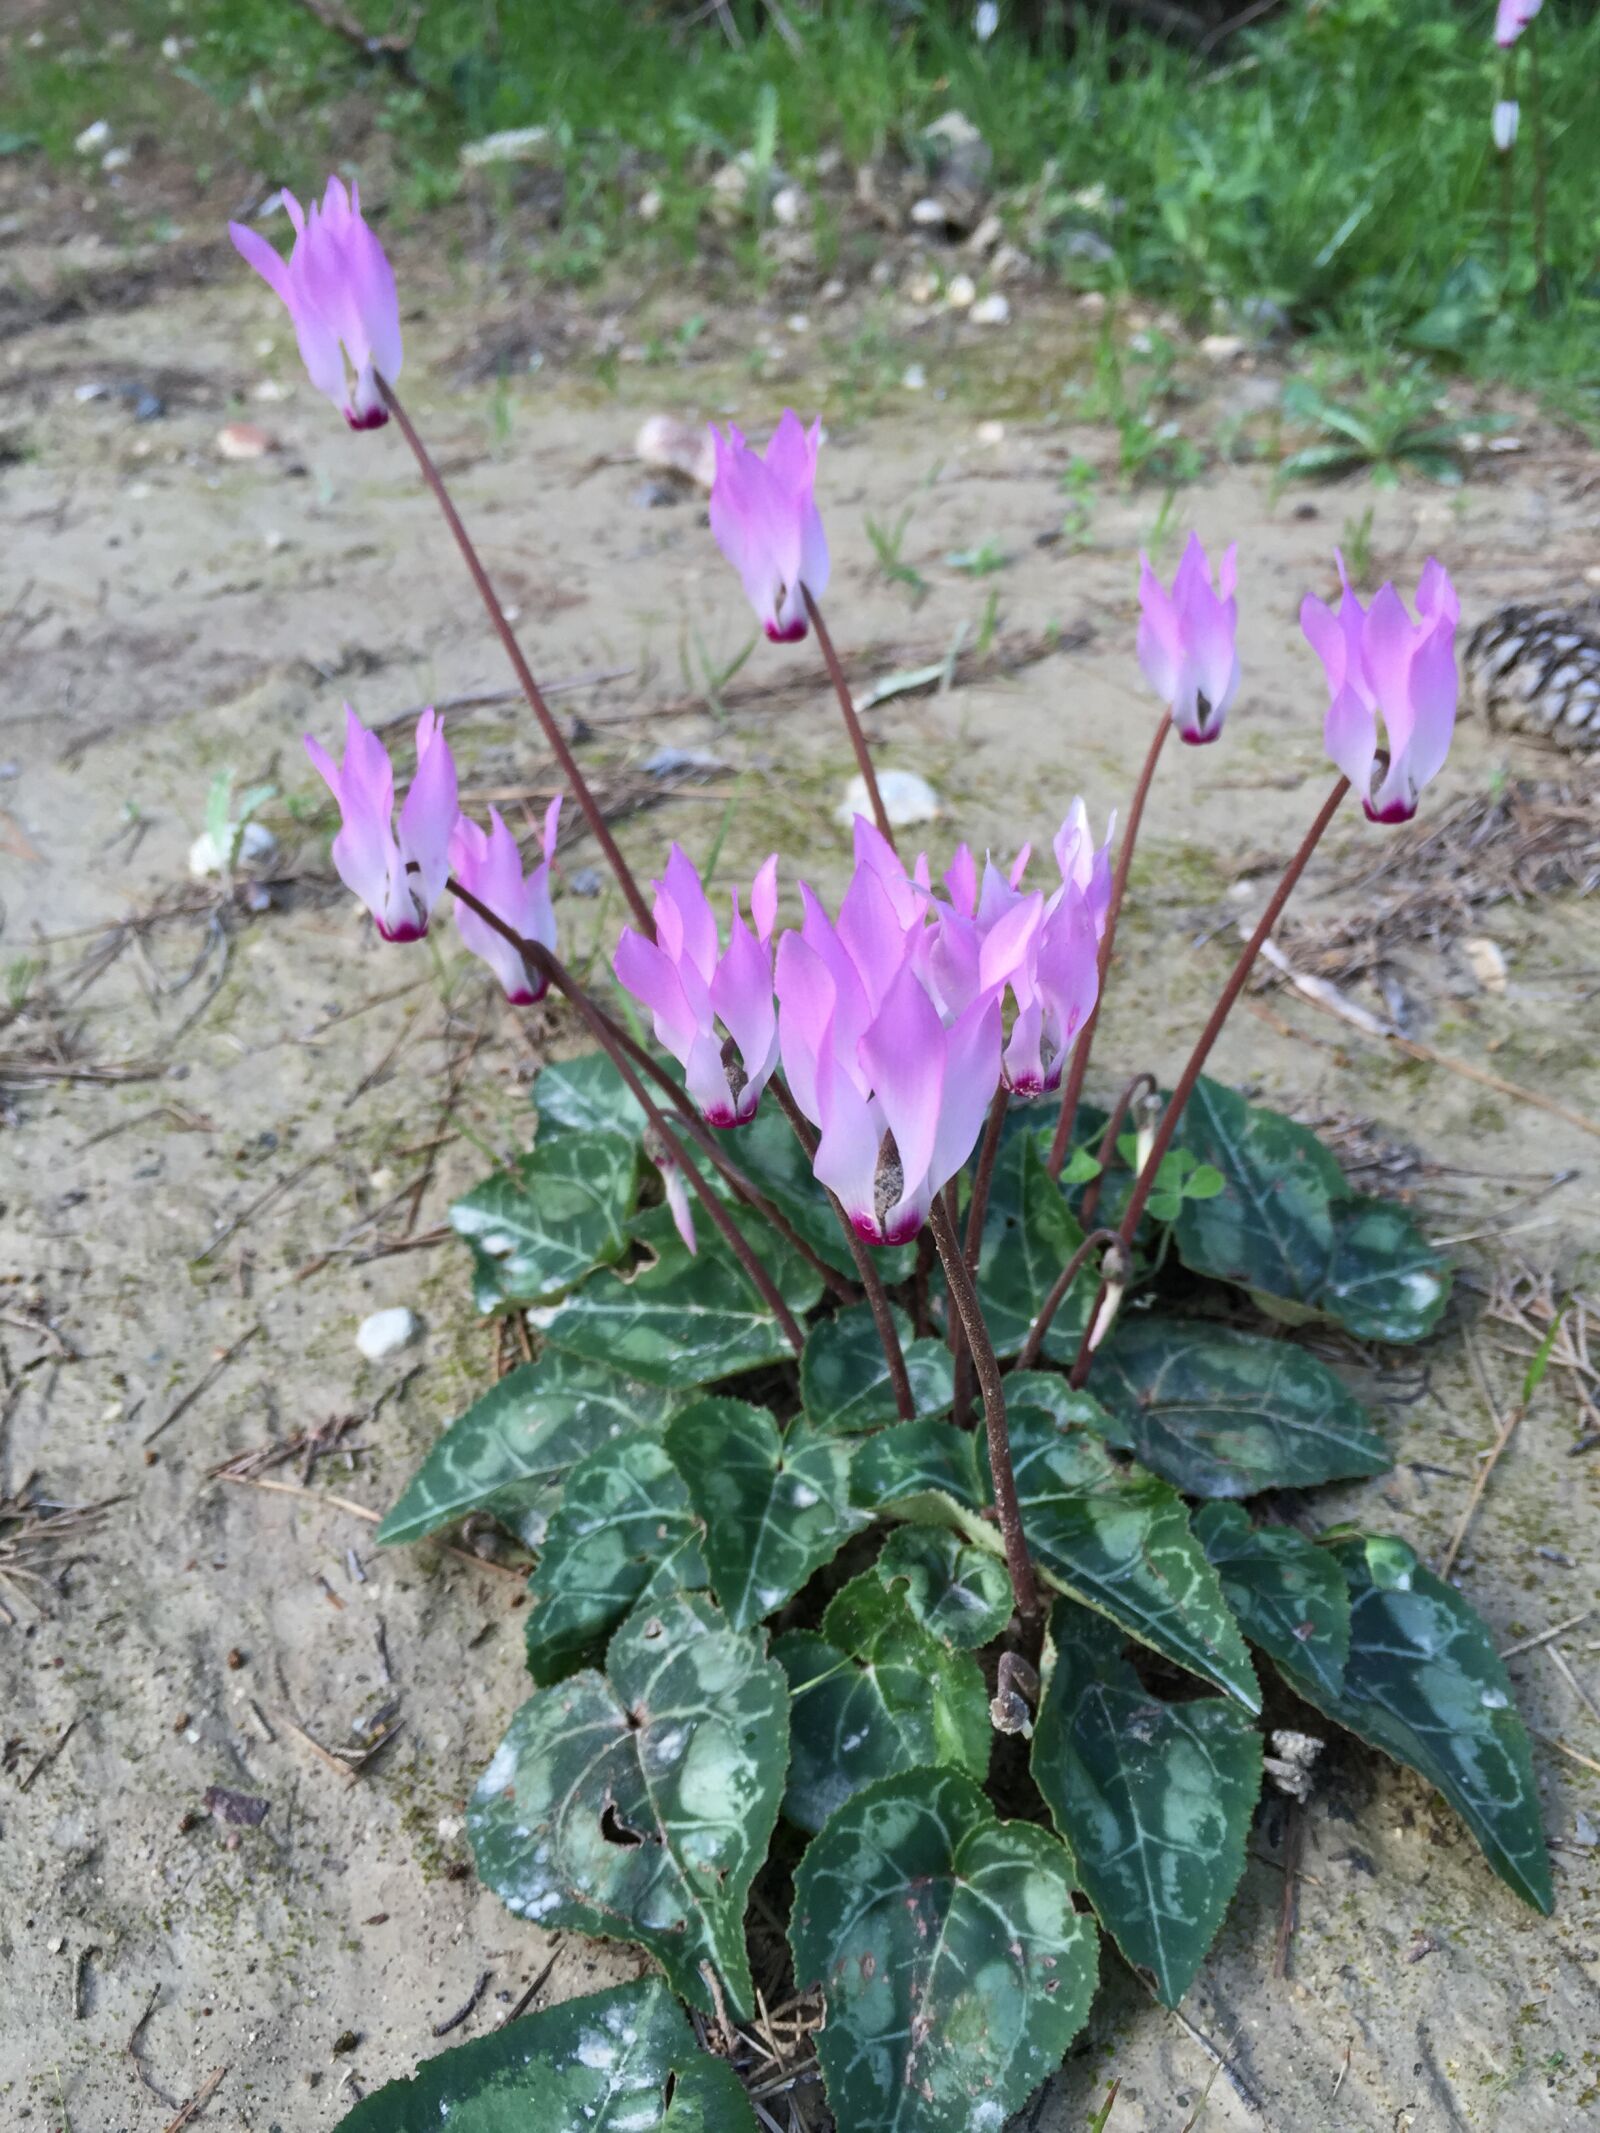 iPhone 6 back camera 4.15mm f/2.2 sample photo. Cyclamens, flowers, nature photography